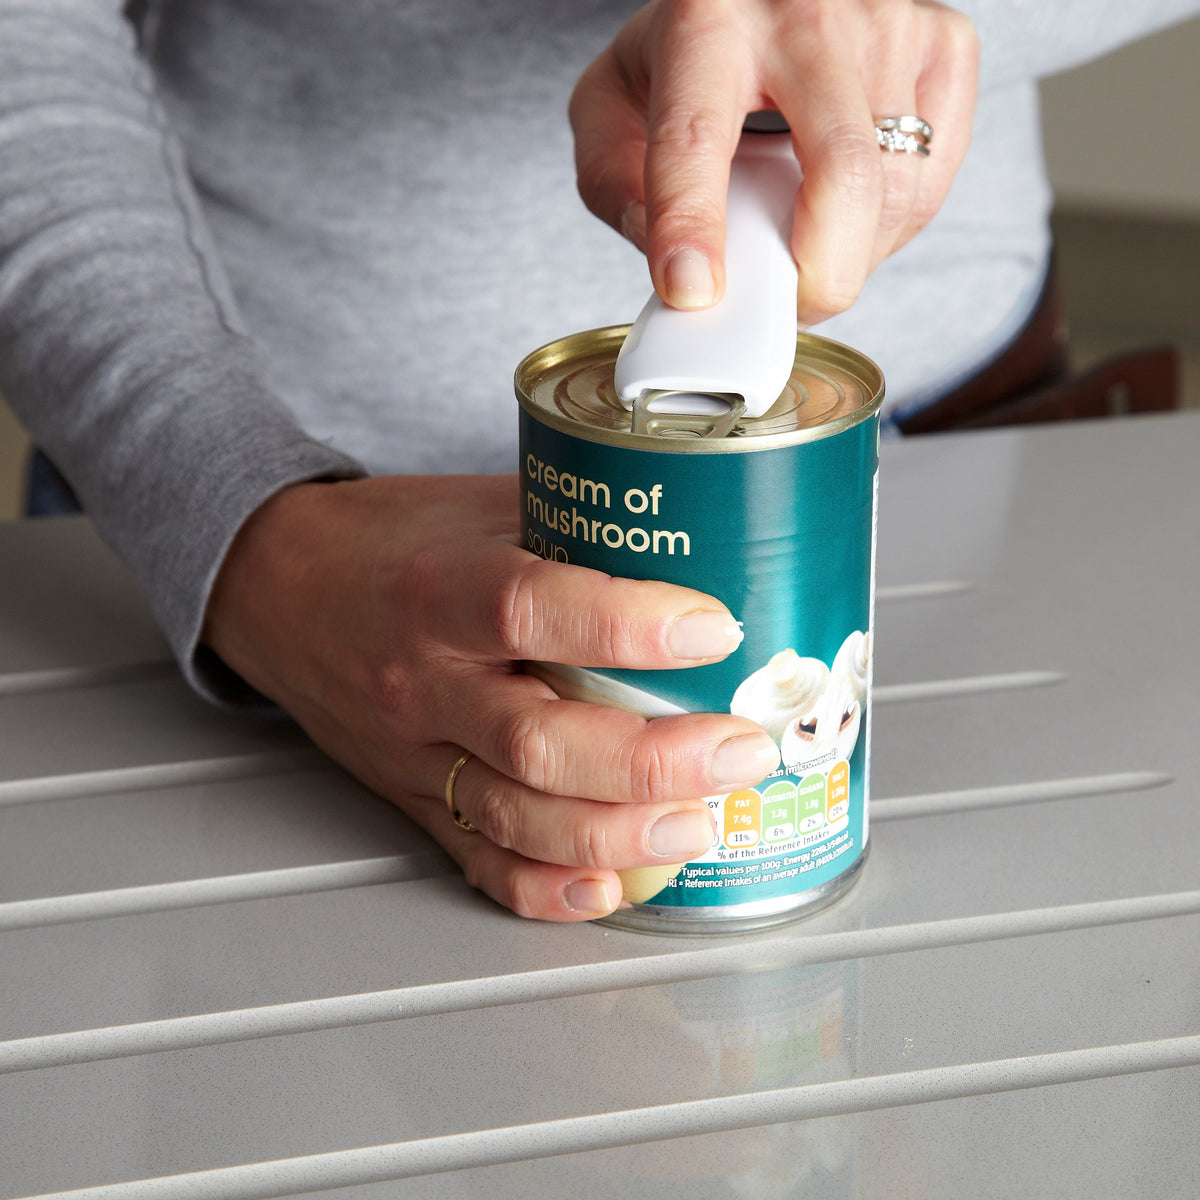 Hand close-up using a gadget to open a ring pull easily on a can of soup